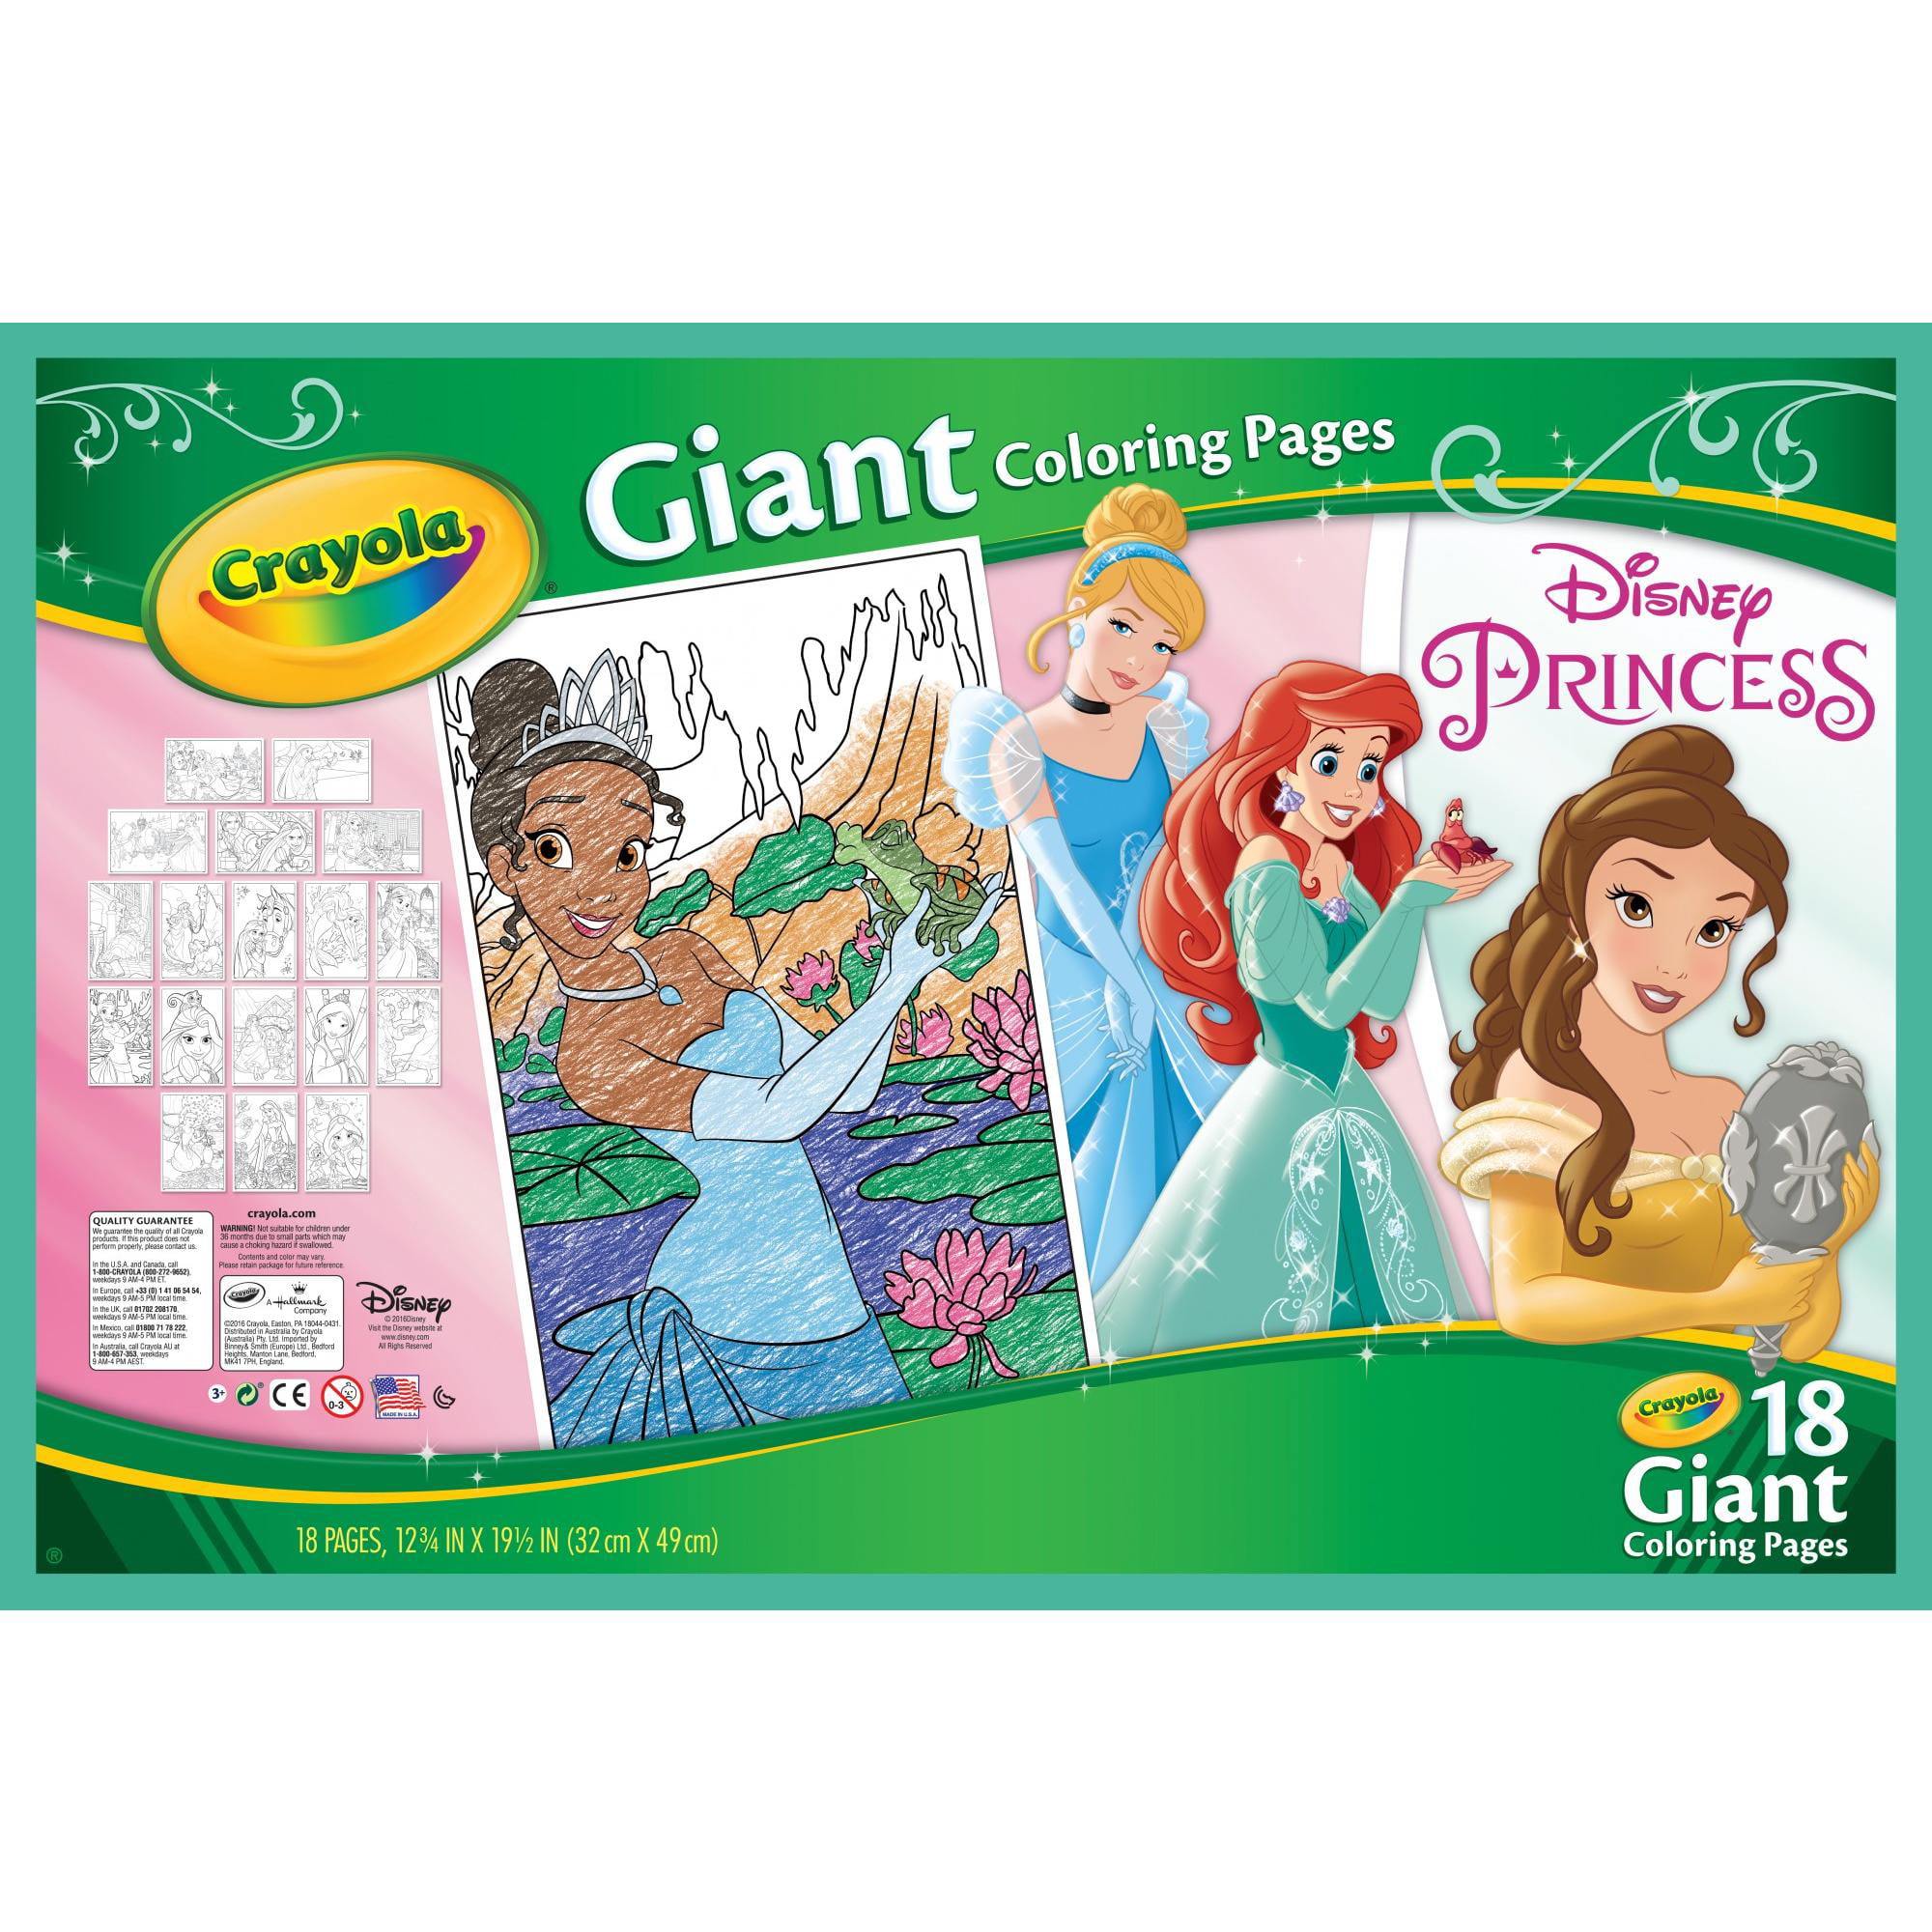 Crayola Giant Coloring Pages Shopkins and Disney